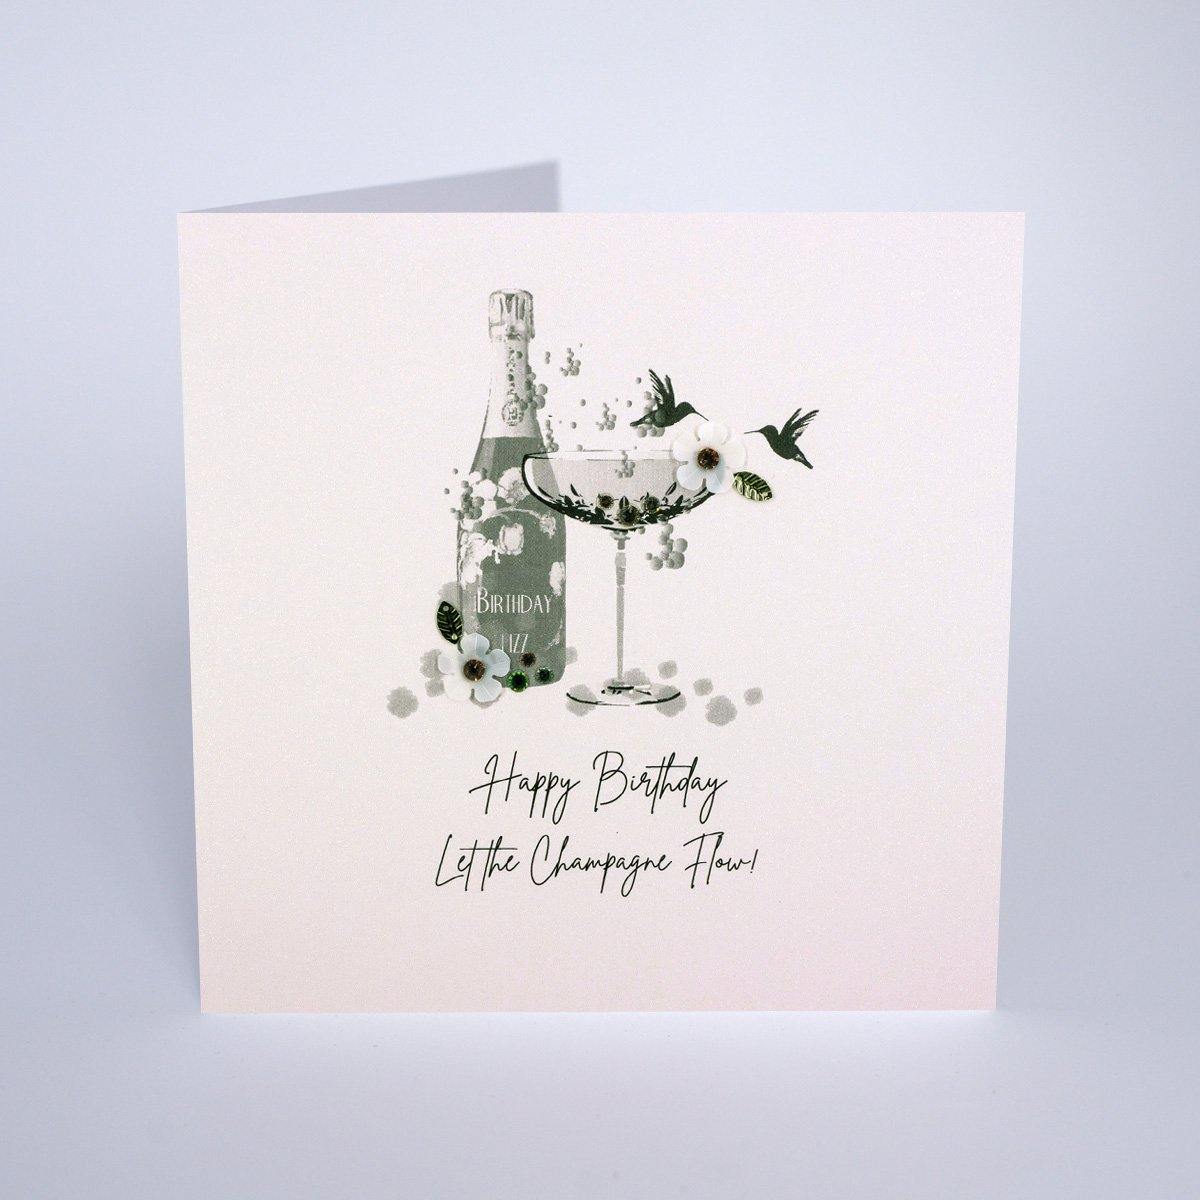 Let The Champagne Flow - Birthday Card - TwoBeeps.co.uk